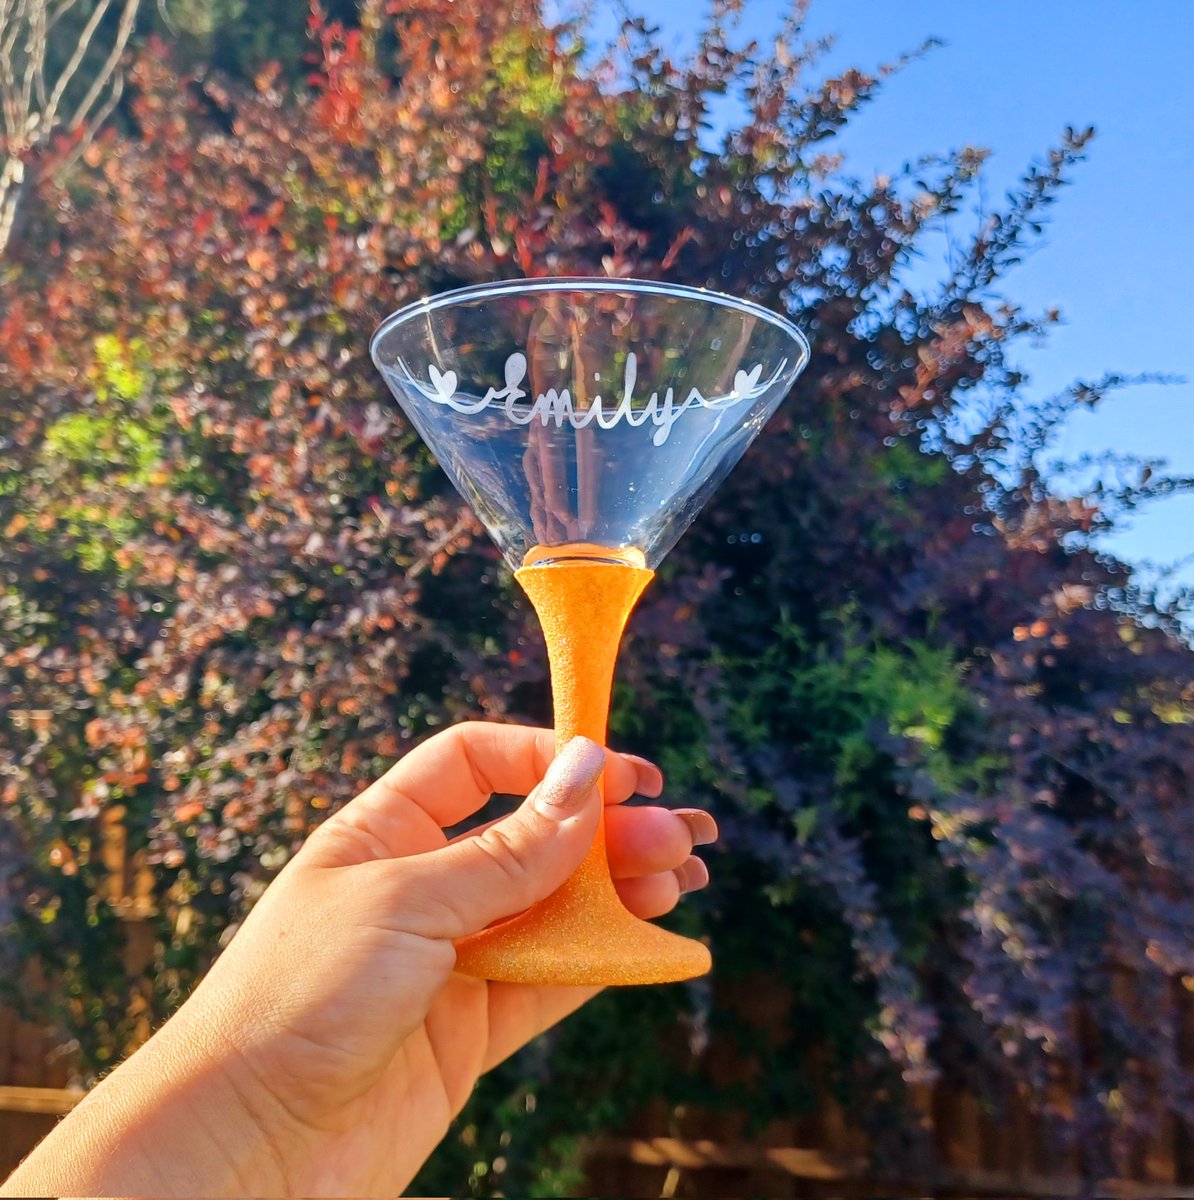 These gorgeous etched #Martini glasses look absolutely fabulous in the sunshine and make the perfect glass to hold your summer cocktail #summerdrinks

etsy.com/uk/shop/Handma…

@smallbizshoutUK @UKGiftHour @UKGiftHourPower @Woman_InBizHour @wow_handmade @Telltwit1 @coolasleicester